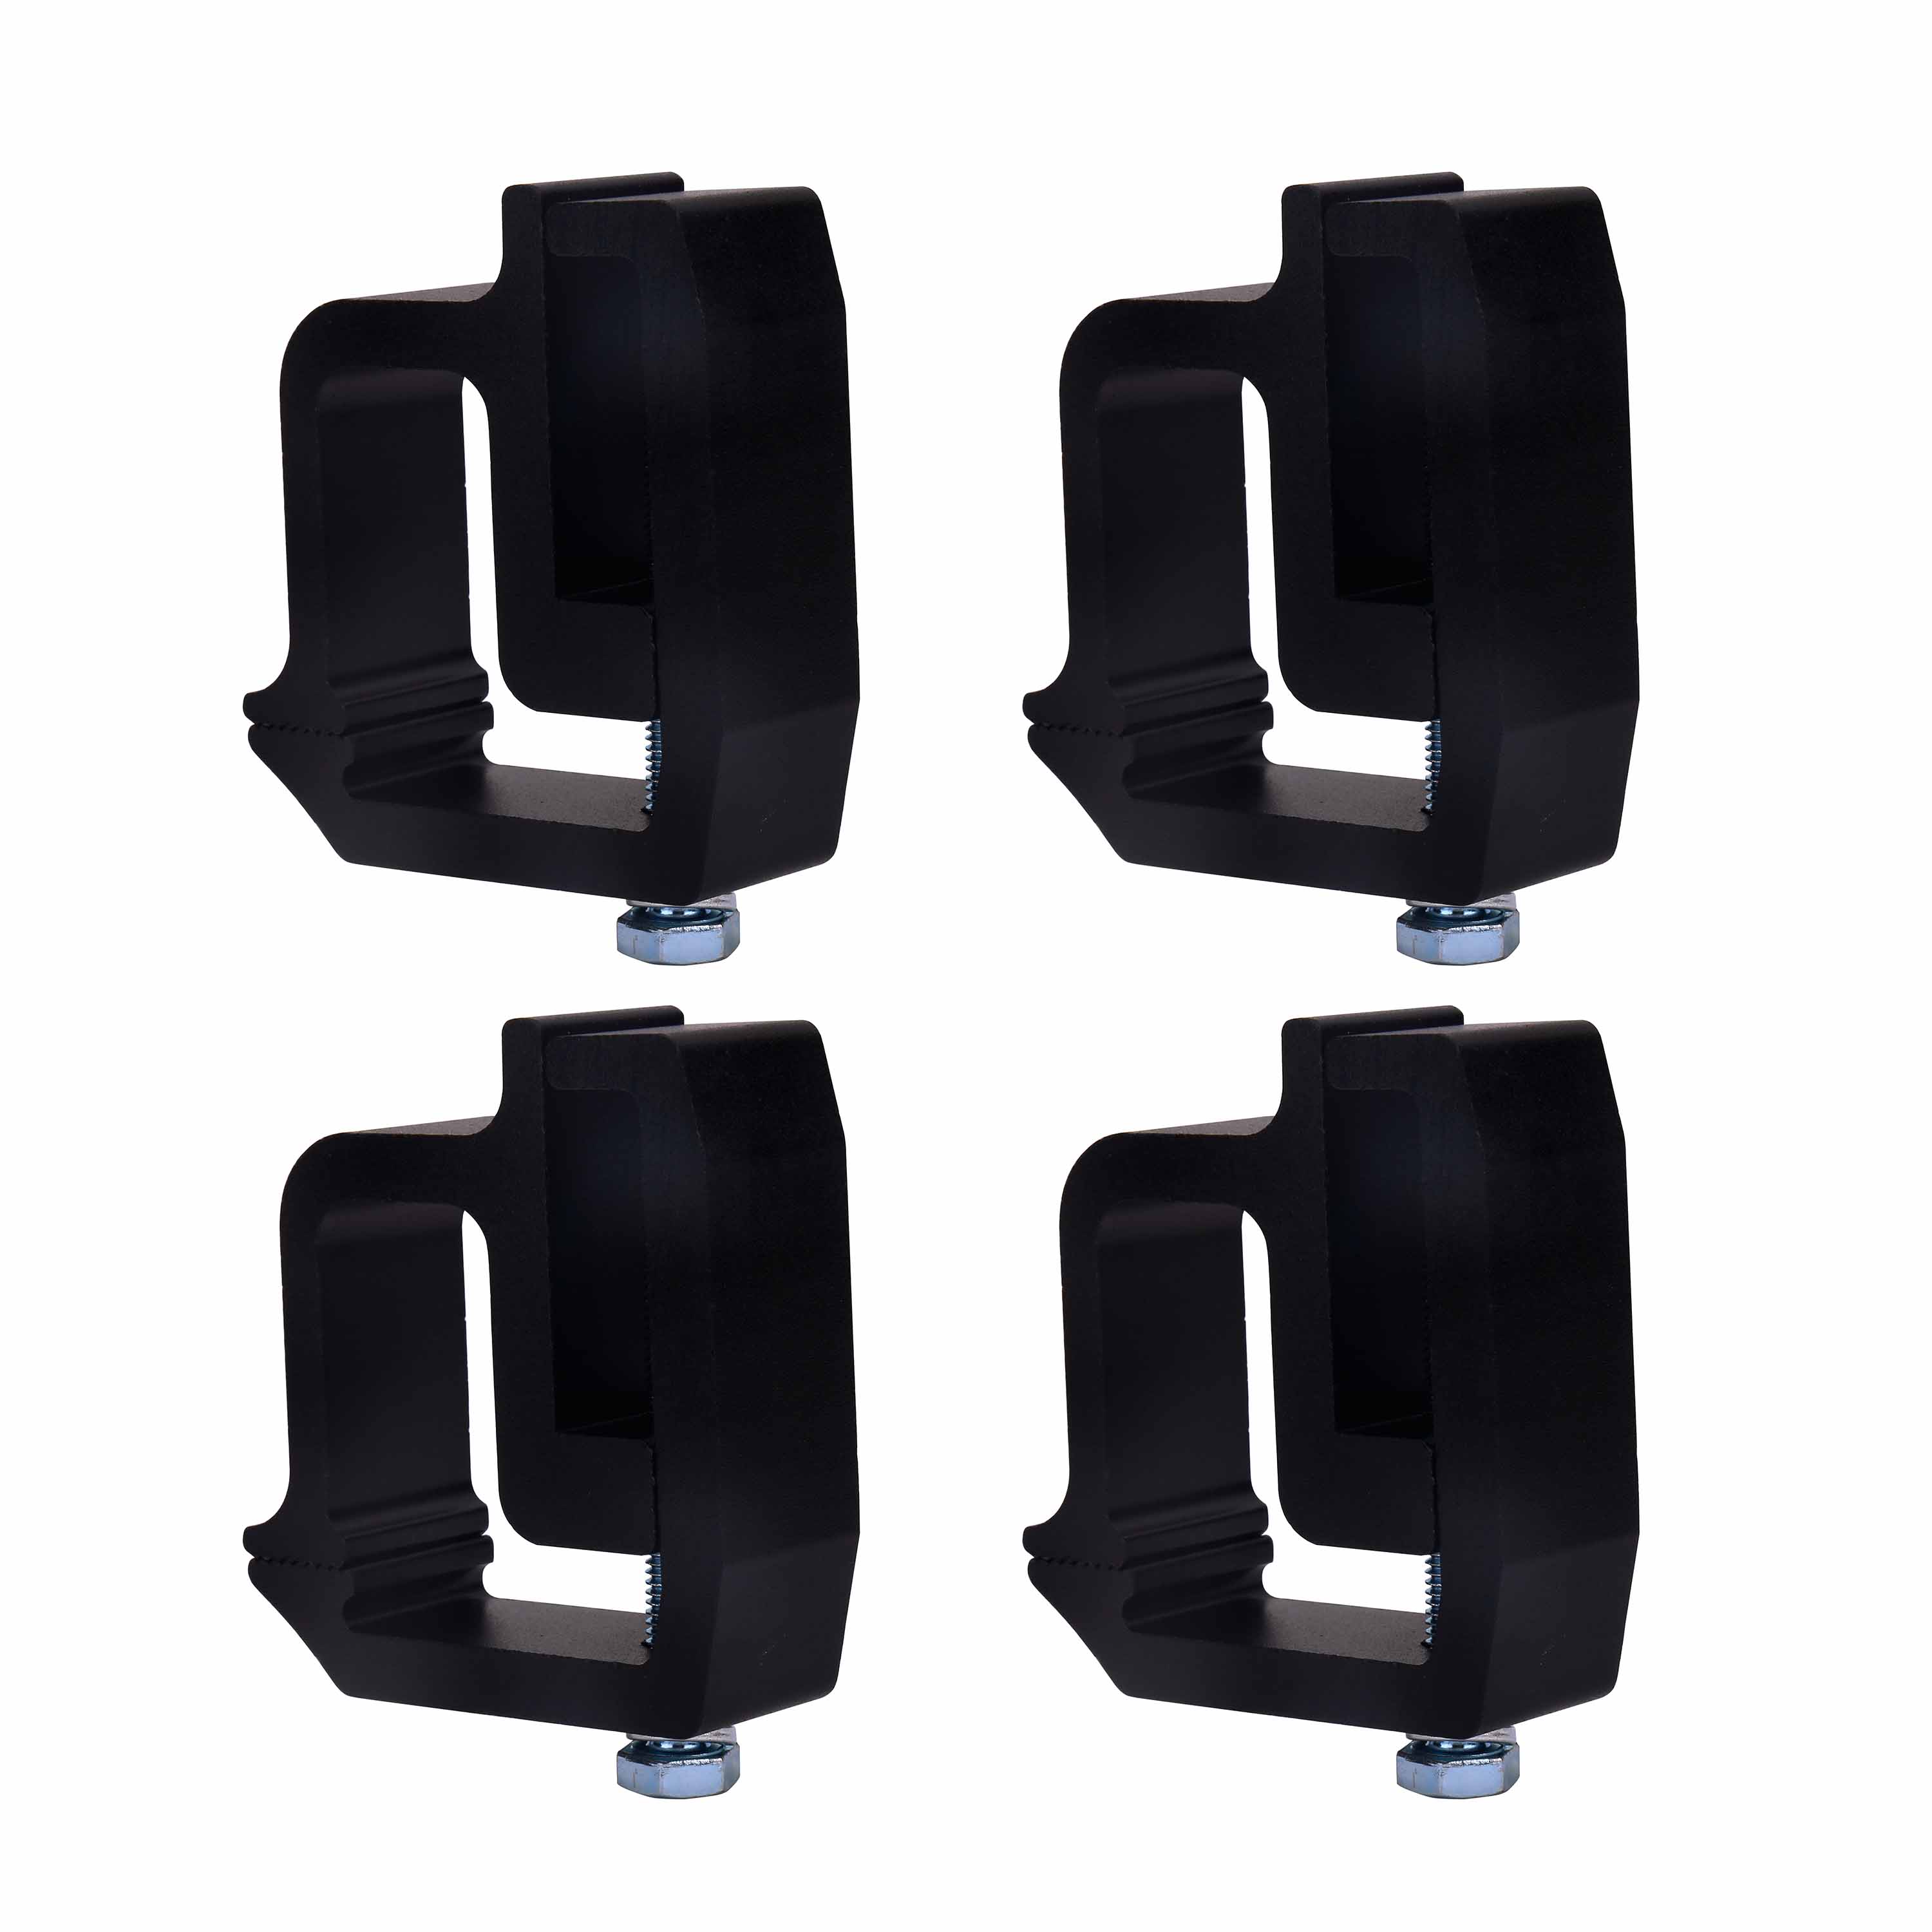 Truck Camper Mounting Clamps Set of 4 - Fits Chevy, Ford, Dodge and Toyota Trucks Image